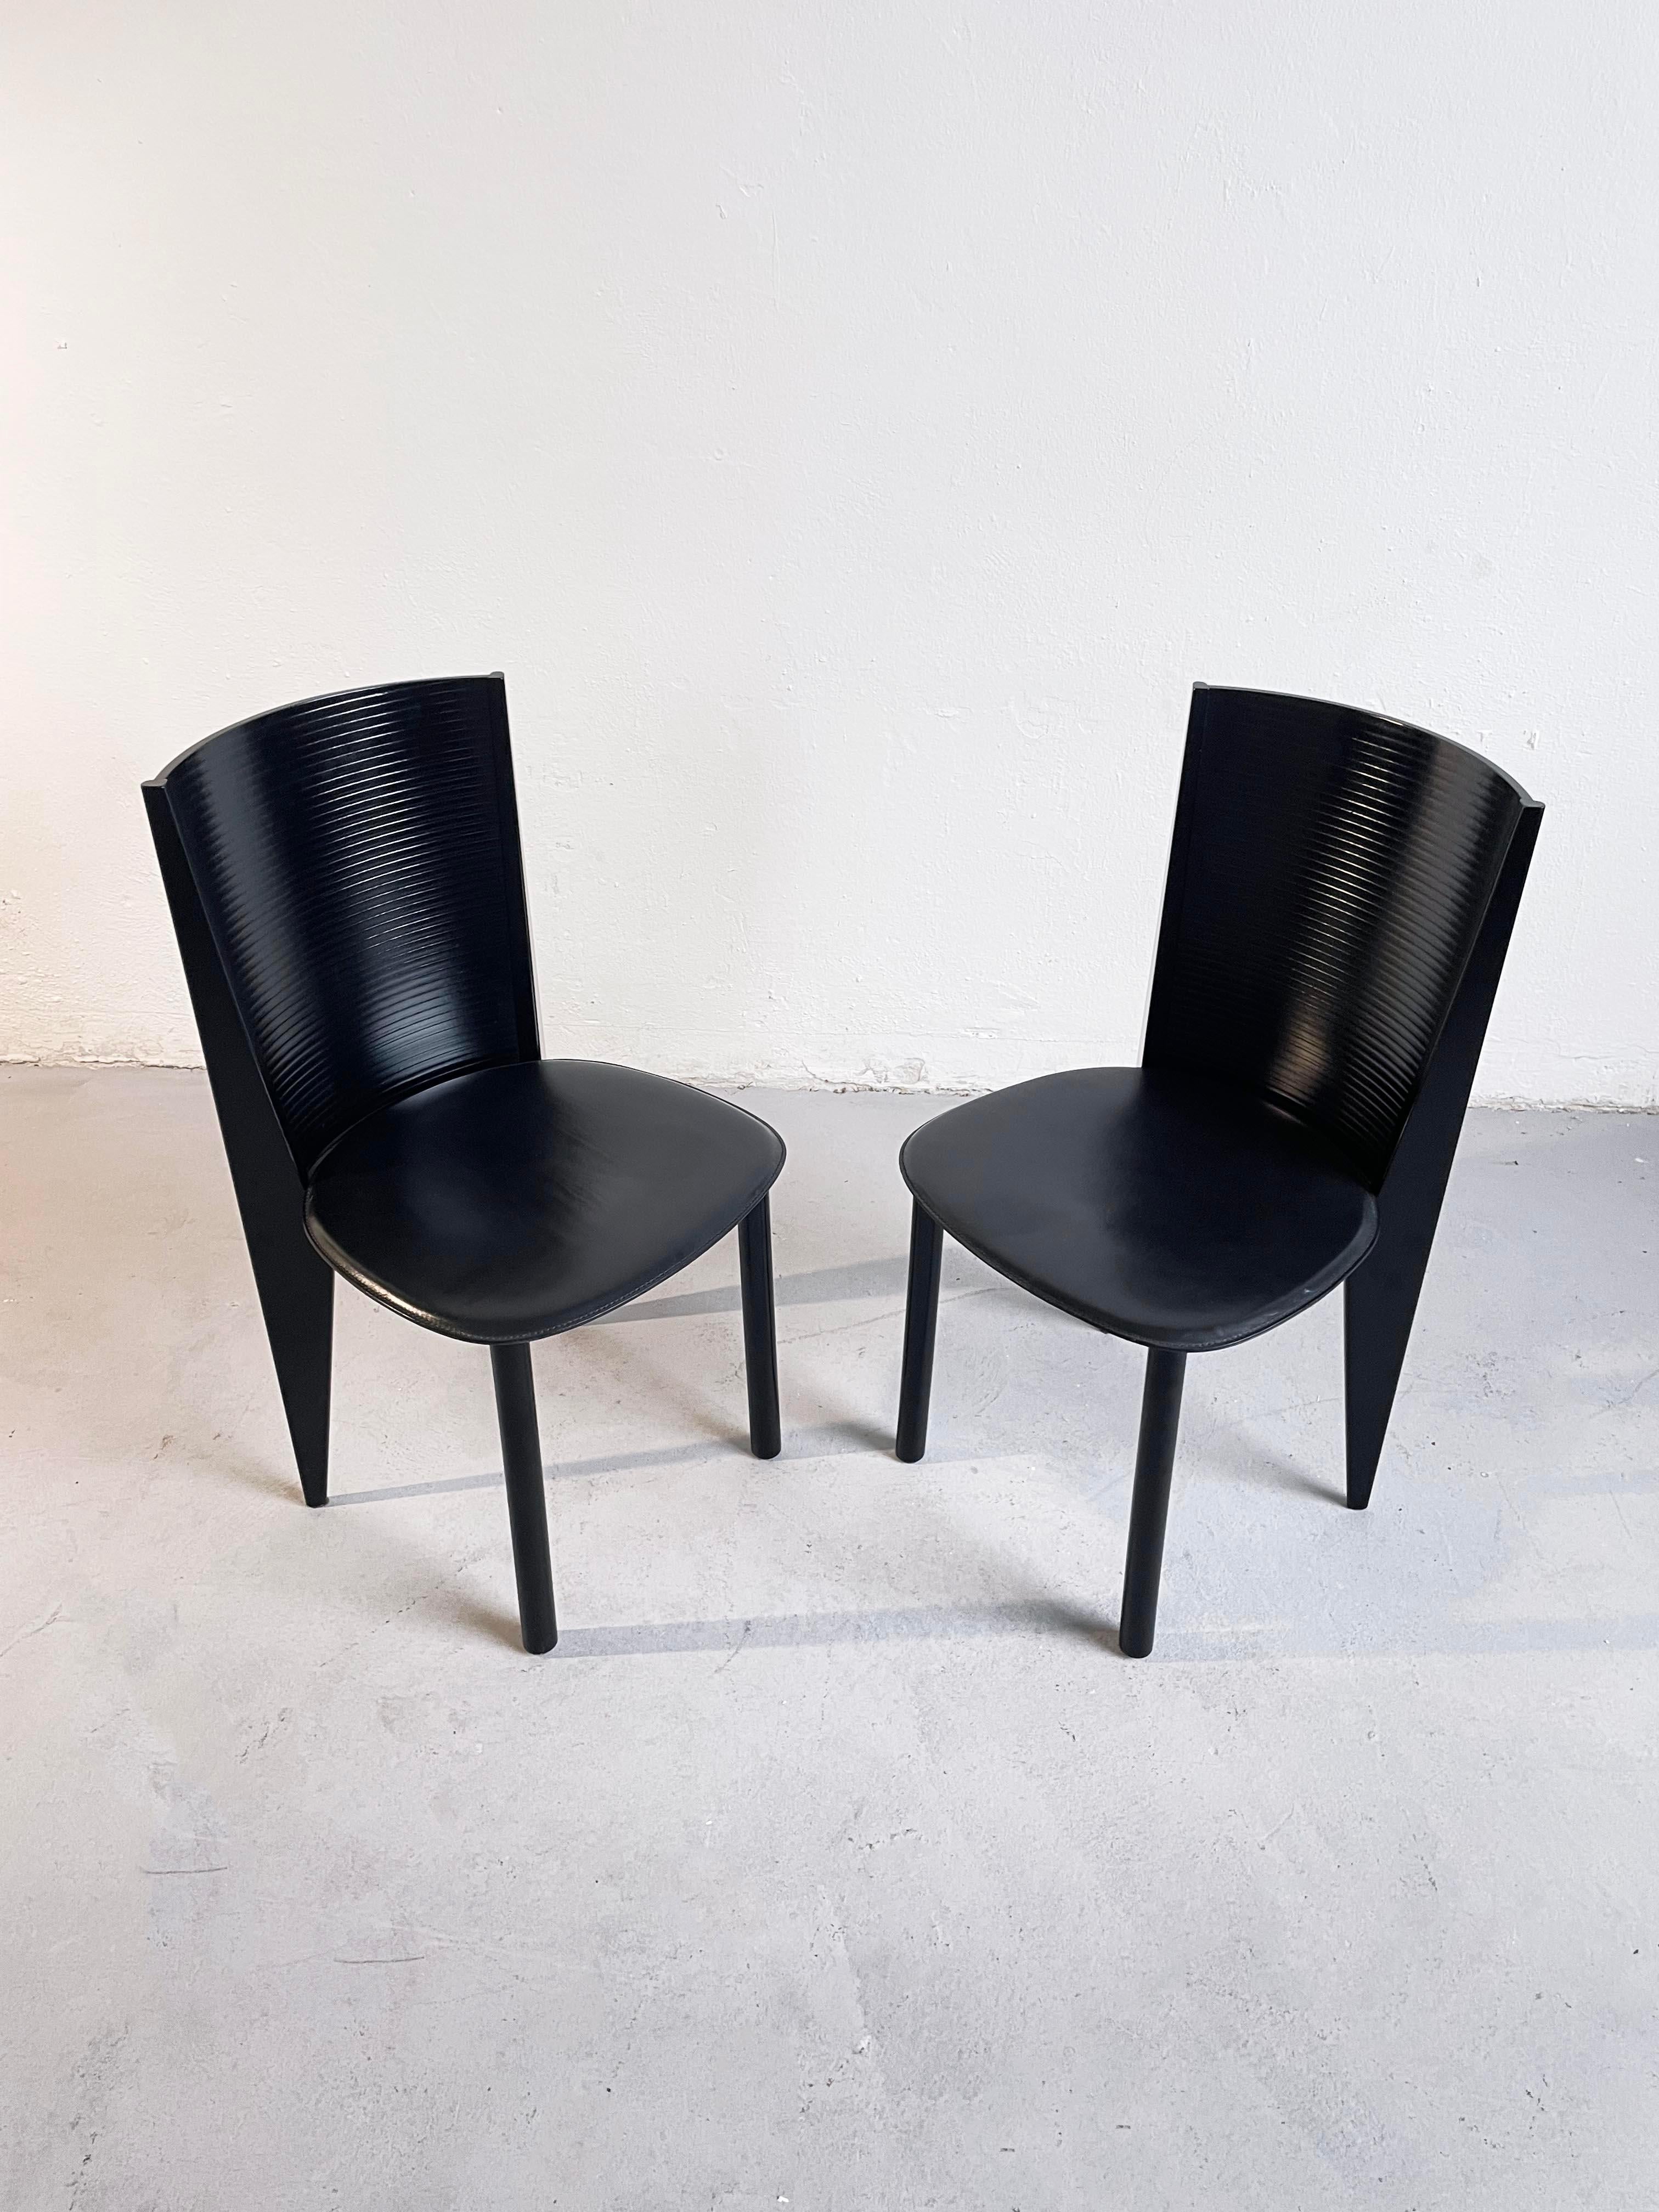 Pair of Italian Postmodern Black Wood and Leather Chairs by Calligaris, 1980s 2